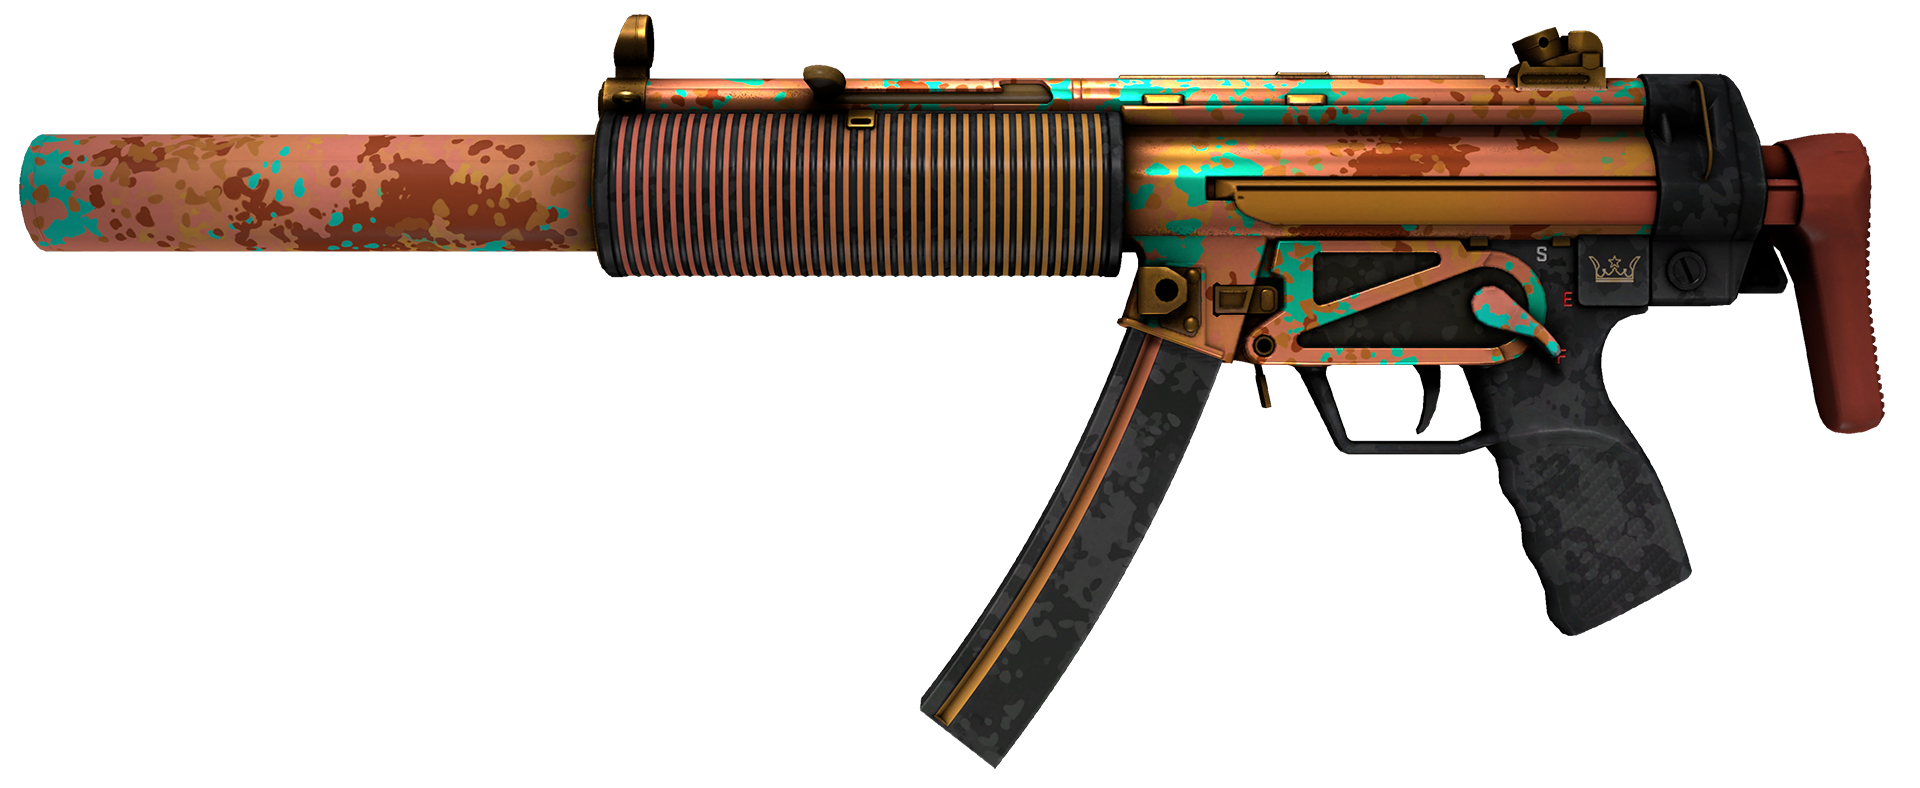 MP5-SD Oxide Oasis Large Rendering